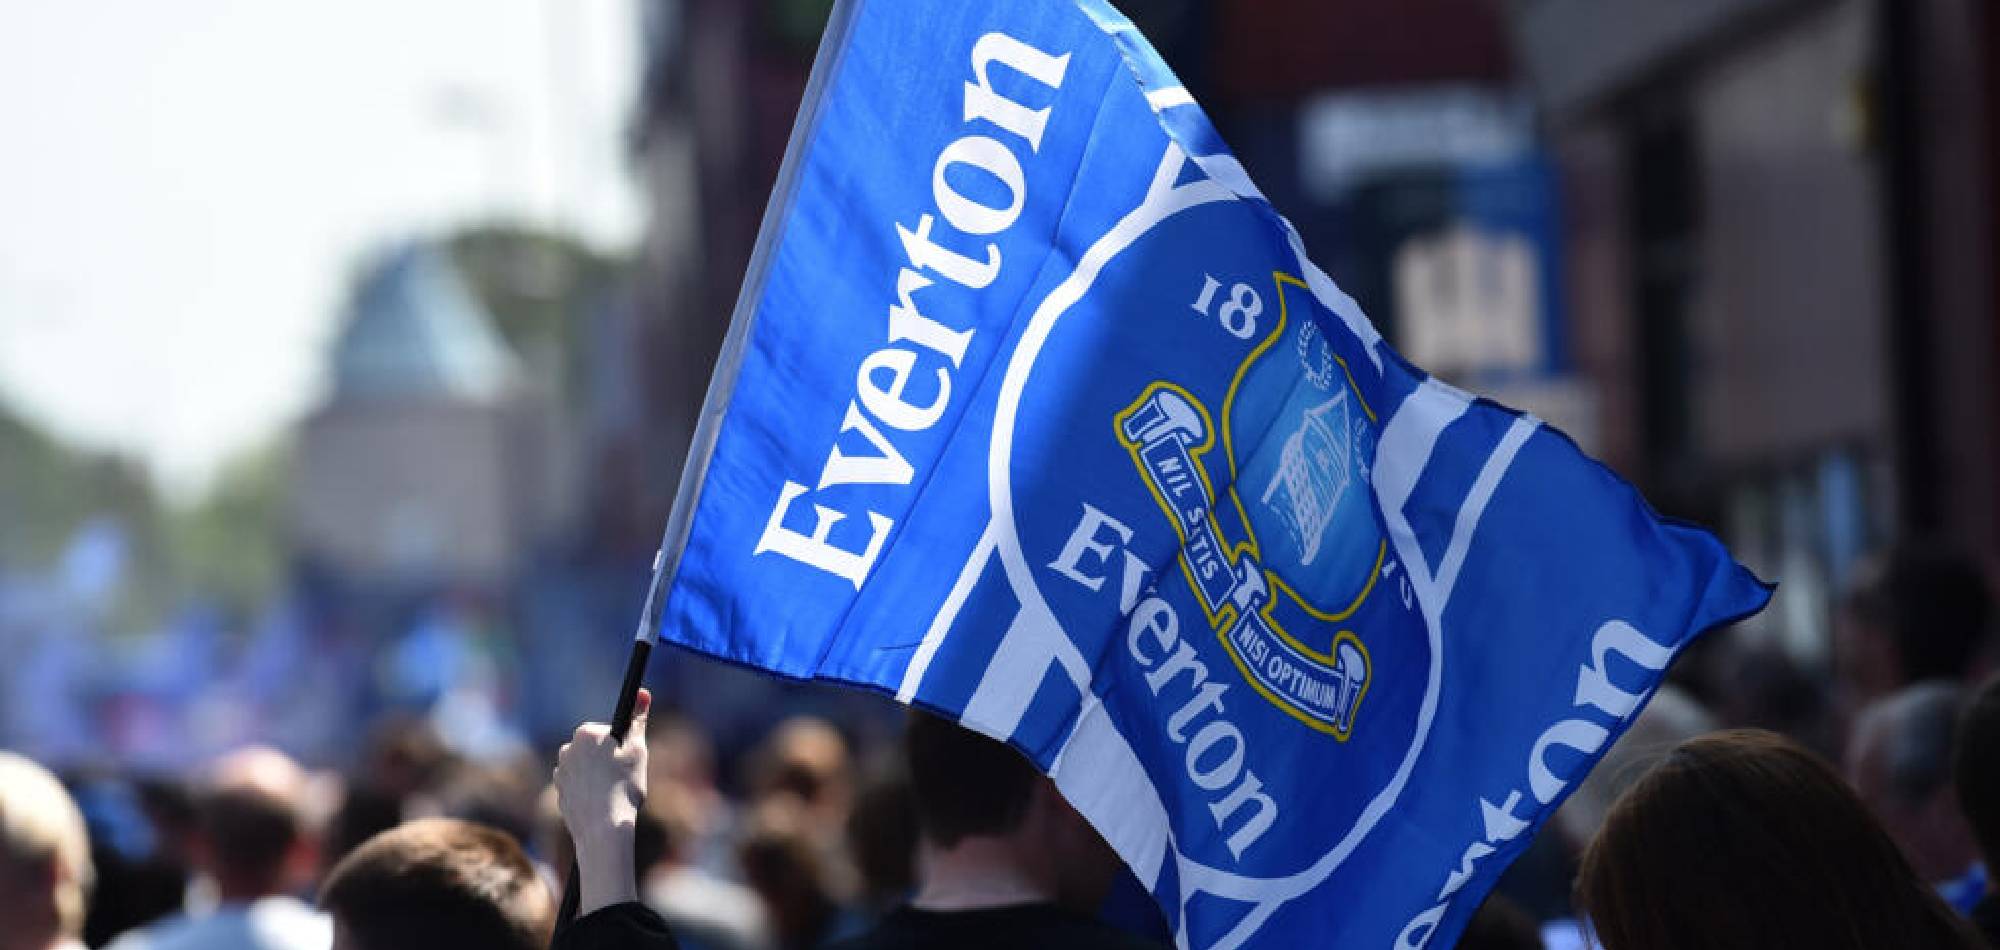 Everton points deduction: Punishment reduced to six points after appeal